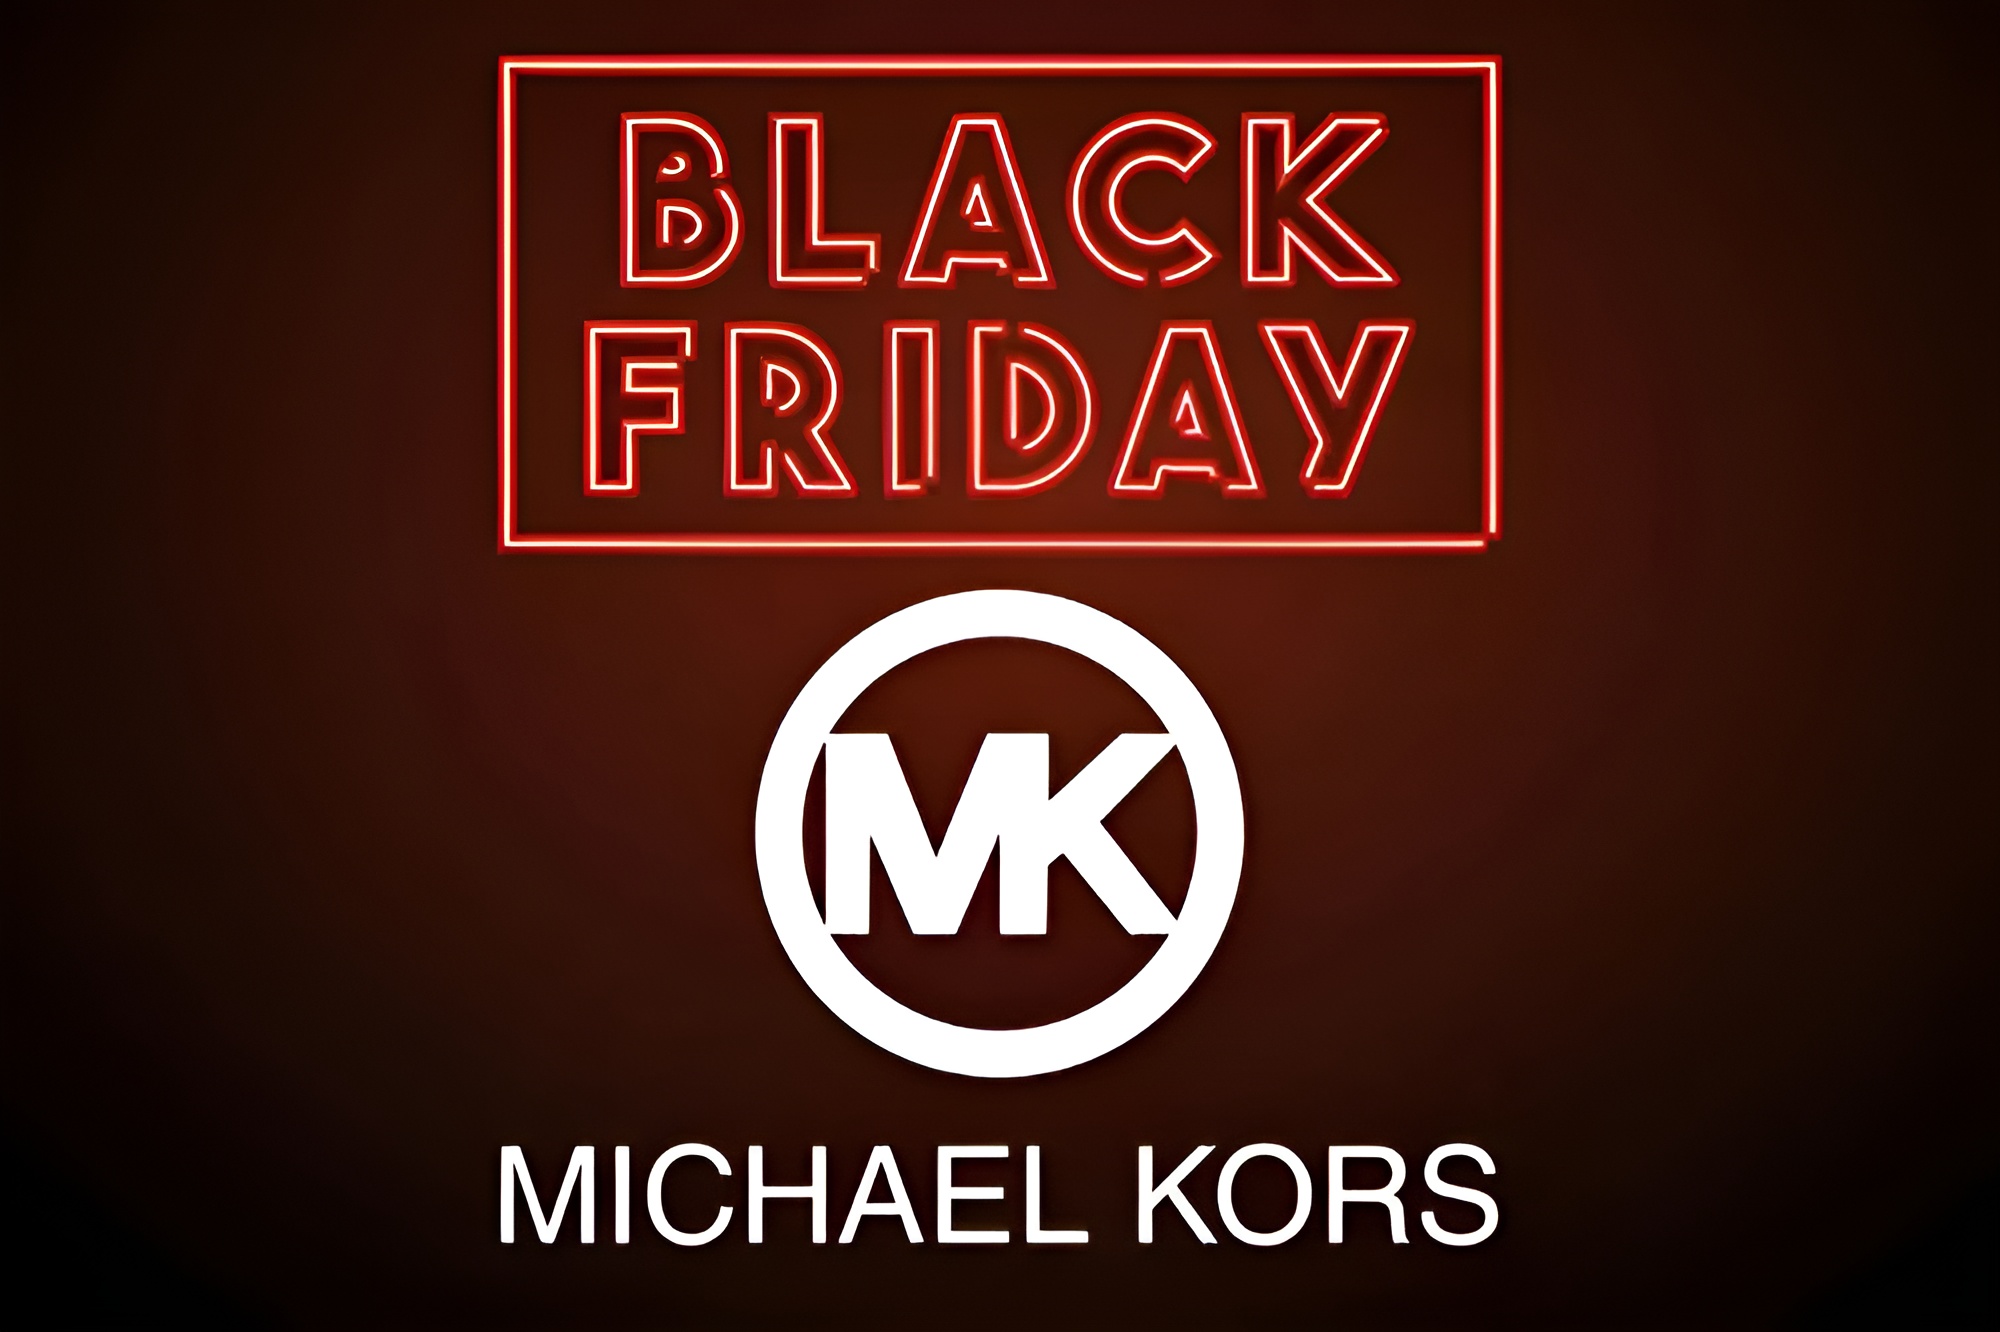 michael kors black friday featured image